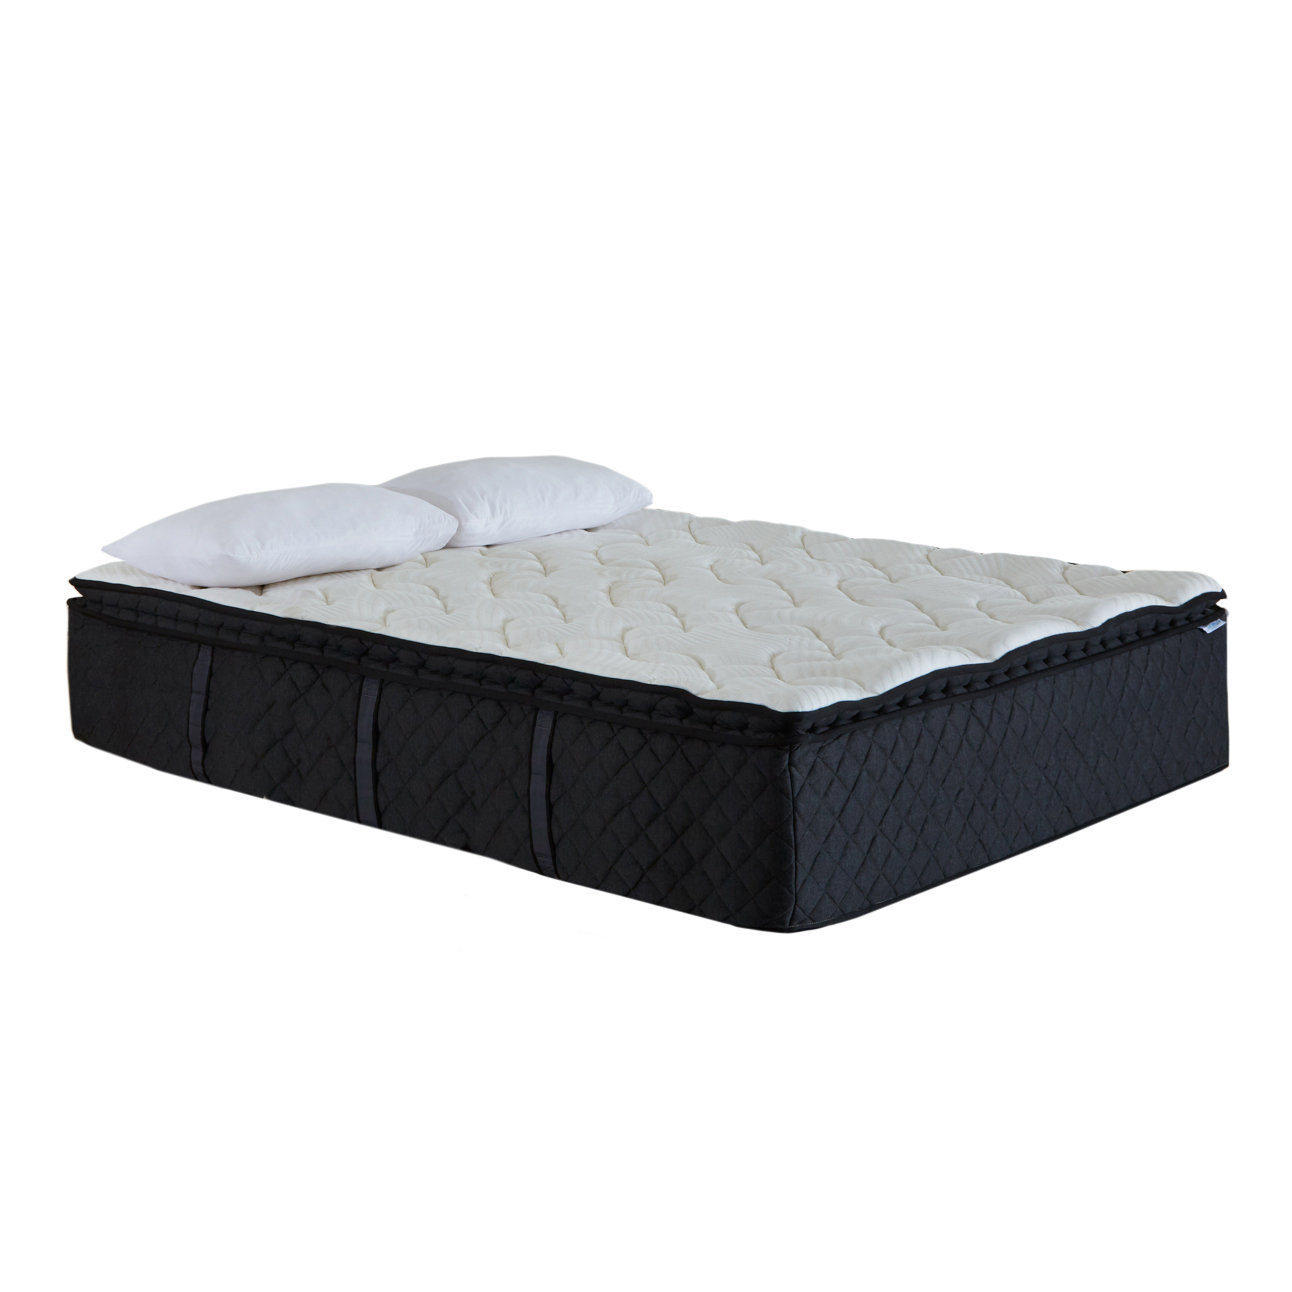 Abbyson 14 Pillow Top Mattress with Charcoal and Copper Infused Memory Foam - California King